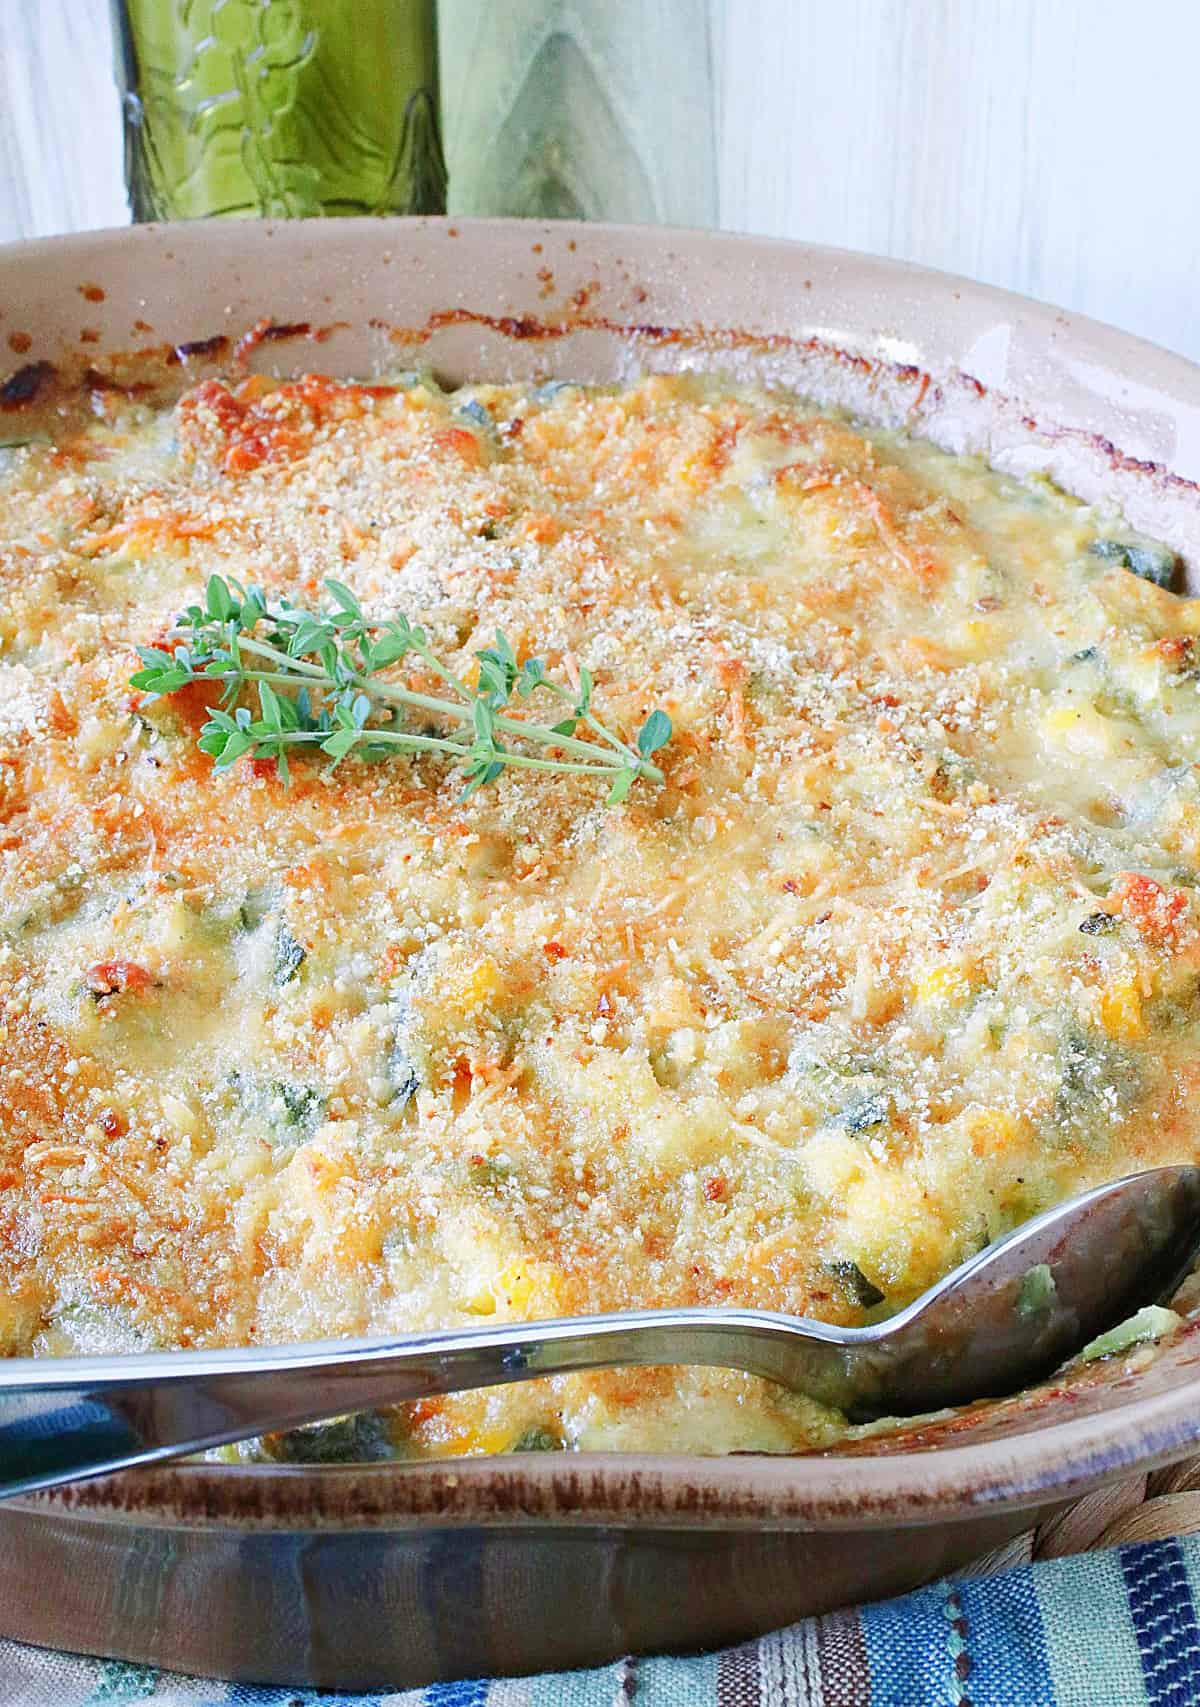 A brown casserole dish filled with baked Zucchini Corn Gratin along with a serving spoon.